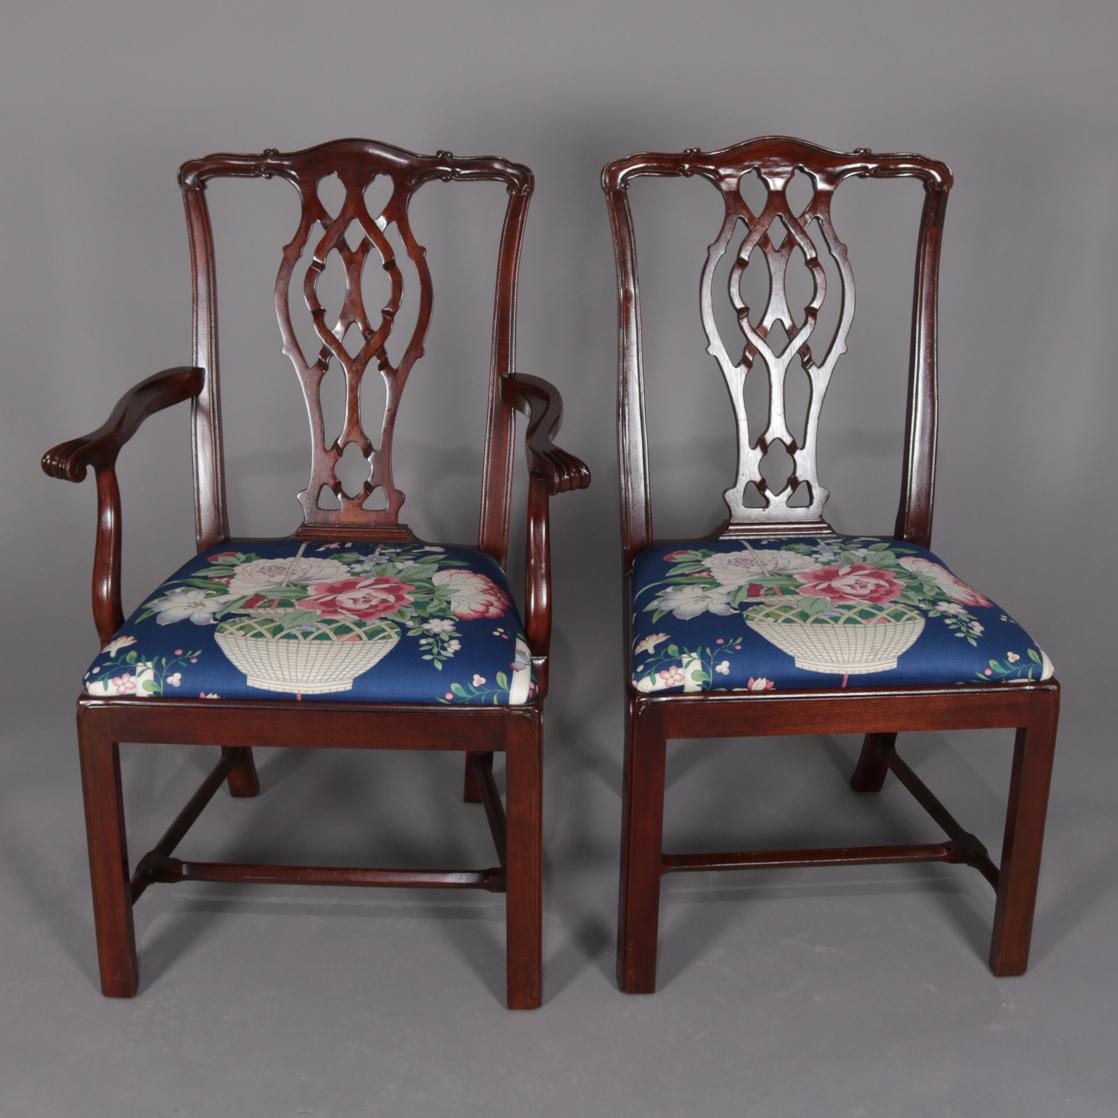 Set of 6 Chippendale style dining chairs feature mahogany frames with ribbon backs and upholstered seats; set includes two armchairs and two side chairs, circa 1940.

Measures: Side chairs 38.5